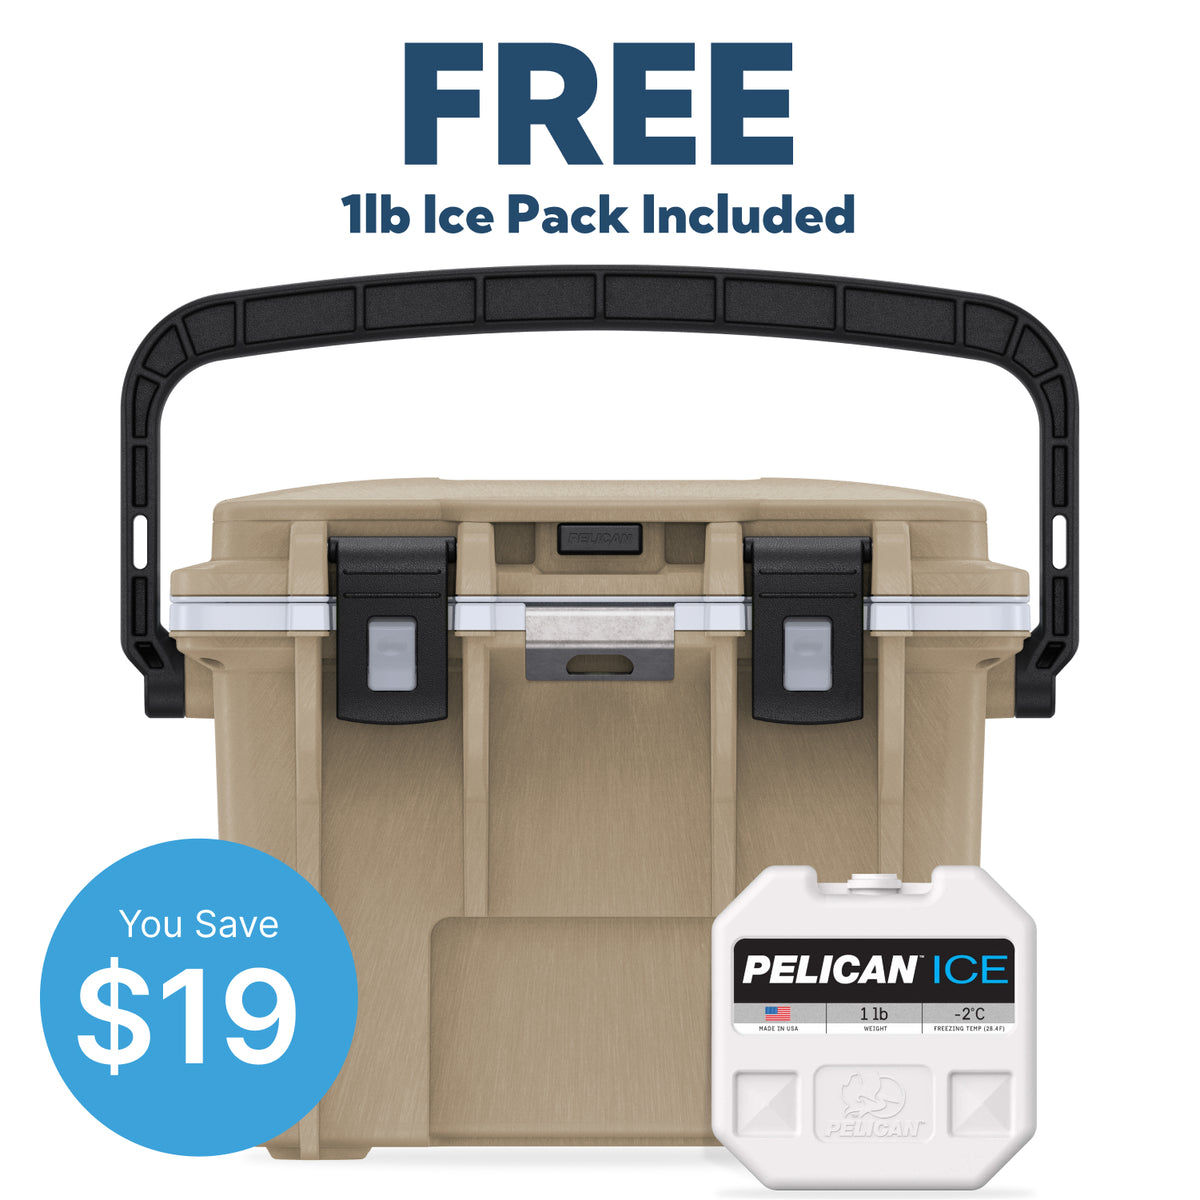 Tan / White Pelican 14QT Personal Cooler with Free 1lb Ice Pack